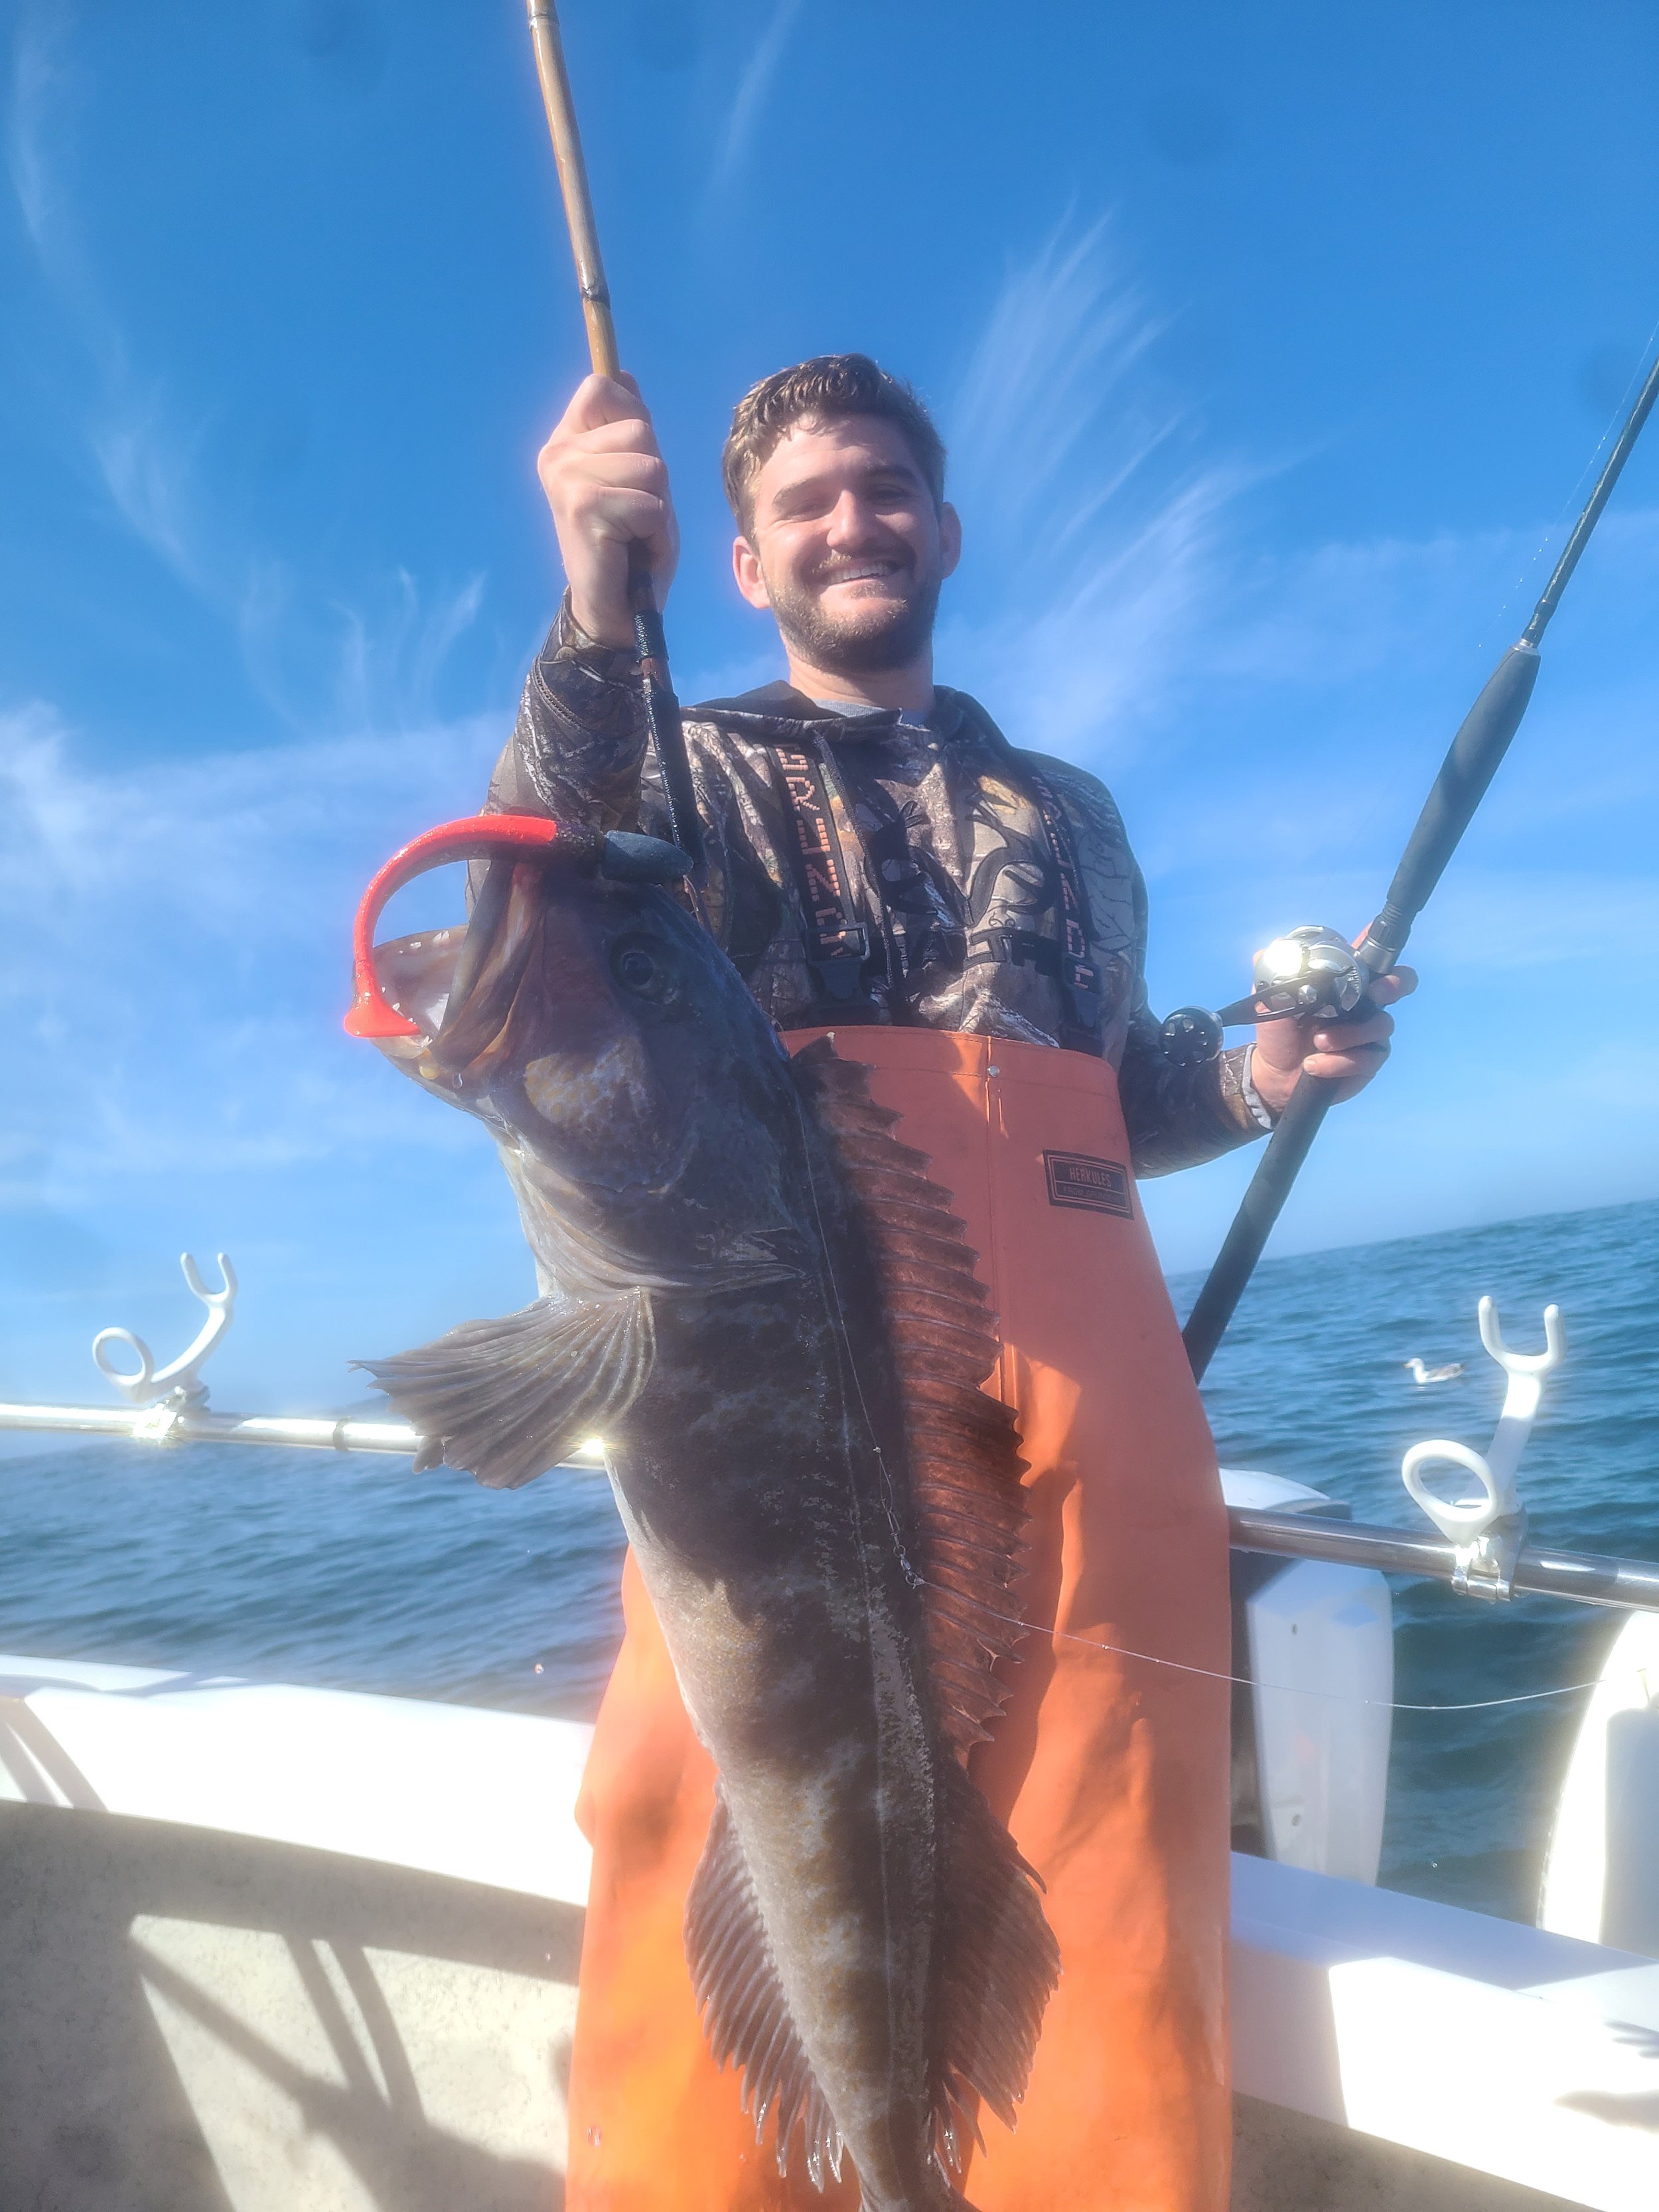 Catching Lingcod on Light Tackle